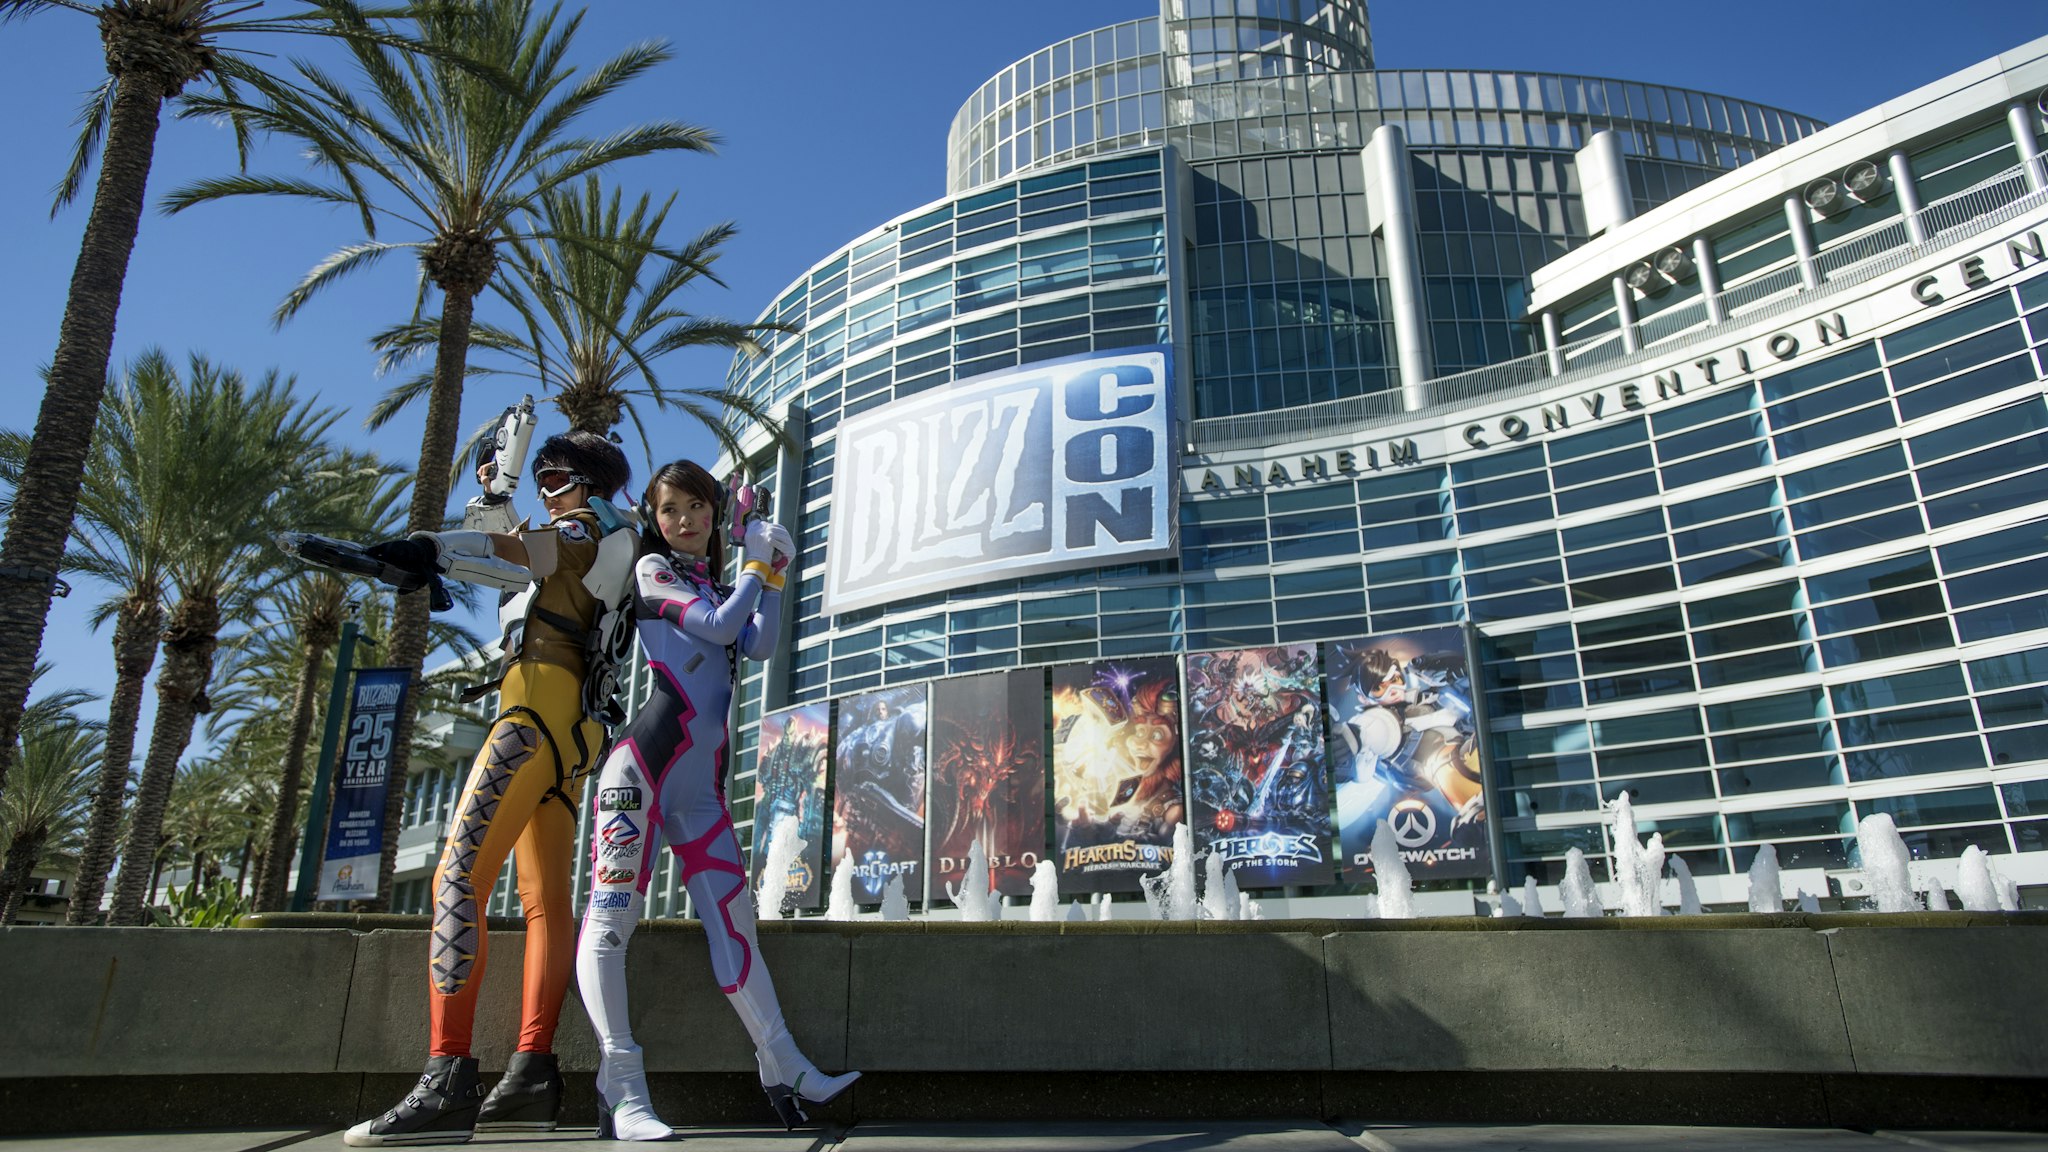 Yayin Chan, dressed as Tracer from the video game Overwathc, left, and Chun Tin Kuo, dressed as D.Va, posed for pictures during Blizzcon in Anaheim, California, November 4, 2016. Blizzcon is the annual gaming convention for Blizzard Entertainment, based in Irvine. (Photo by Jeff Gritchen/Digital First Media/Orange County Register via Getty Images)